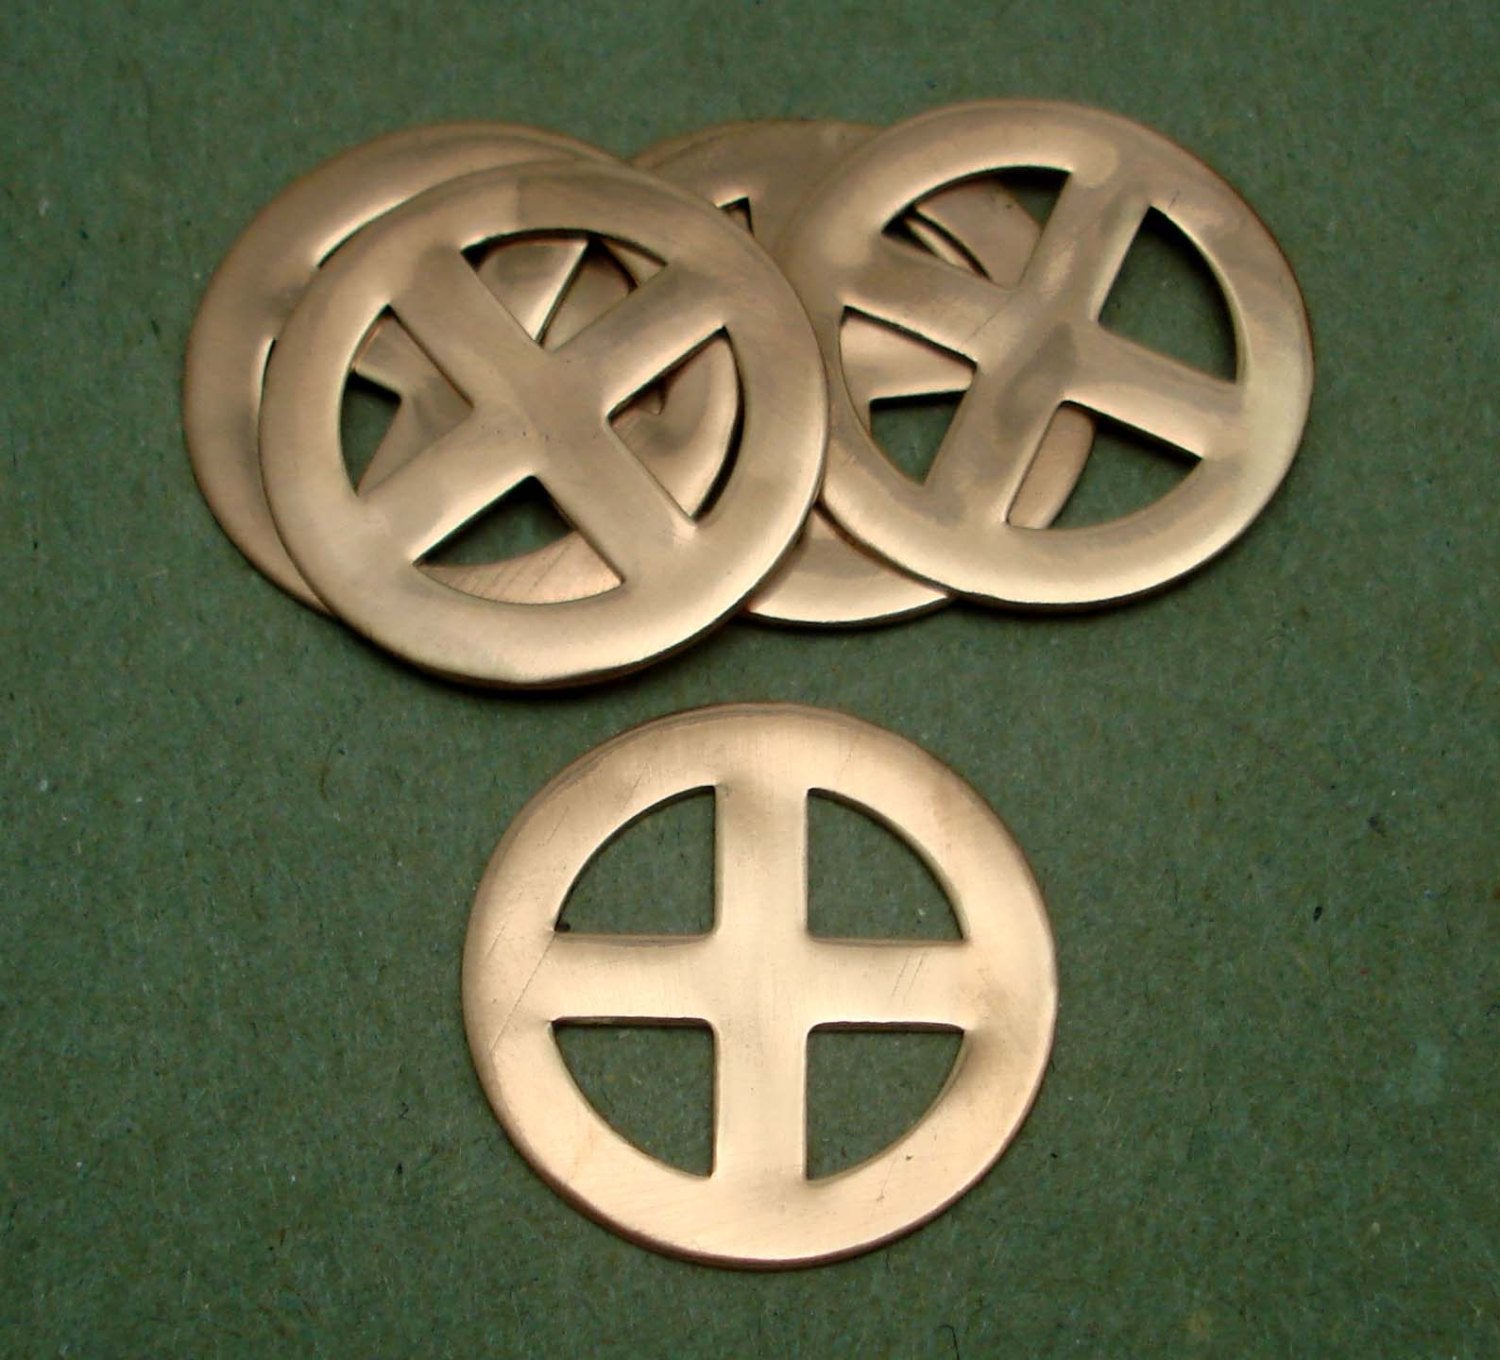 Copper or Brass or Bronze or Nickel Silver 25mm Teethless Gear II Cog Wheel Blanks Cutout for Enameling Stamping Texturing